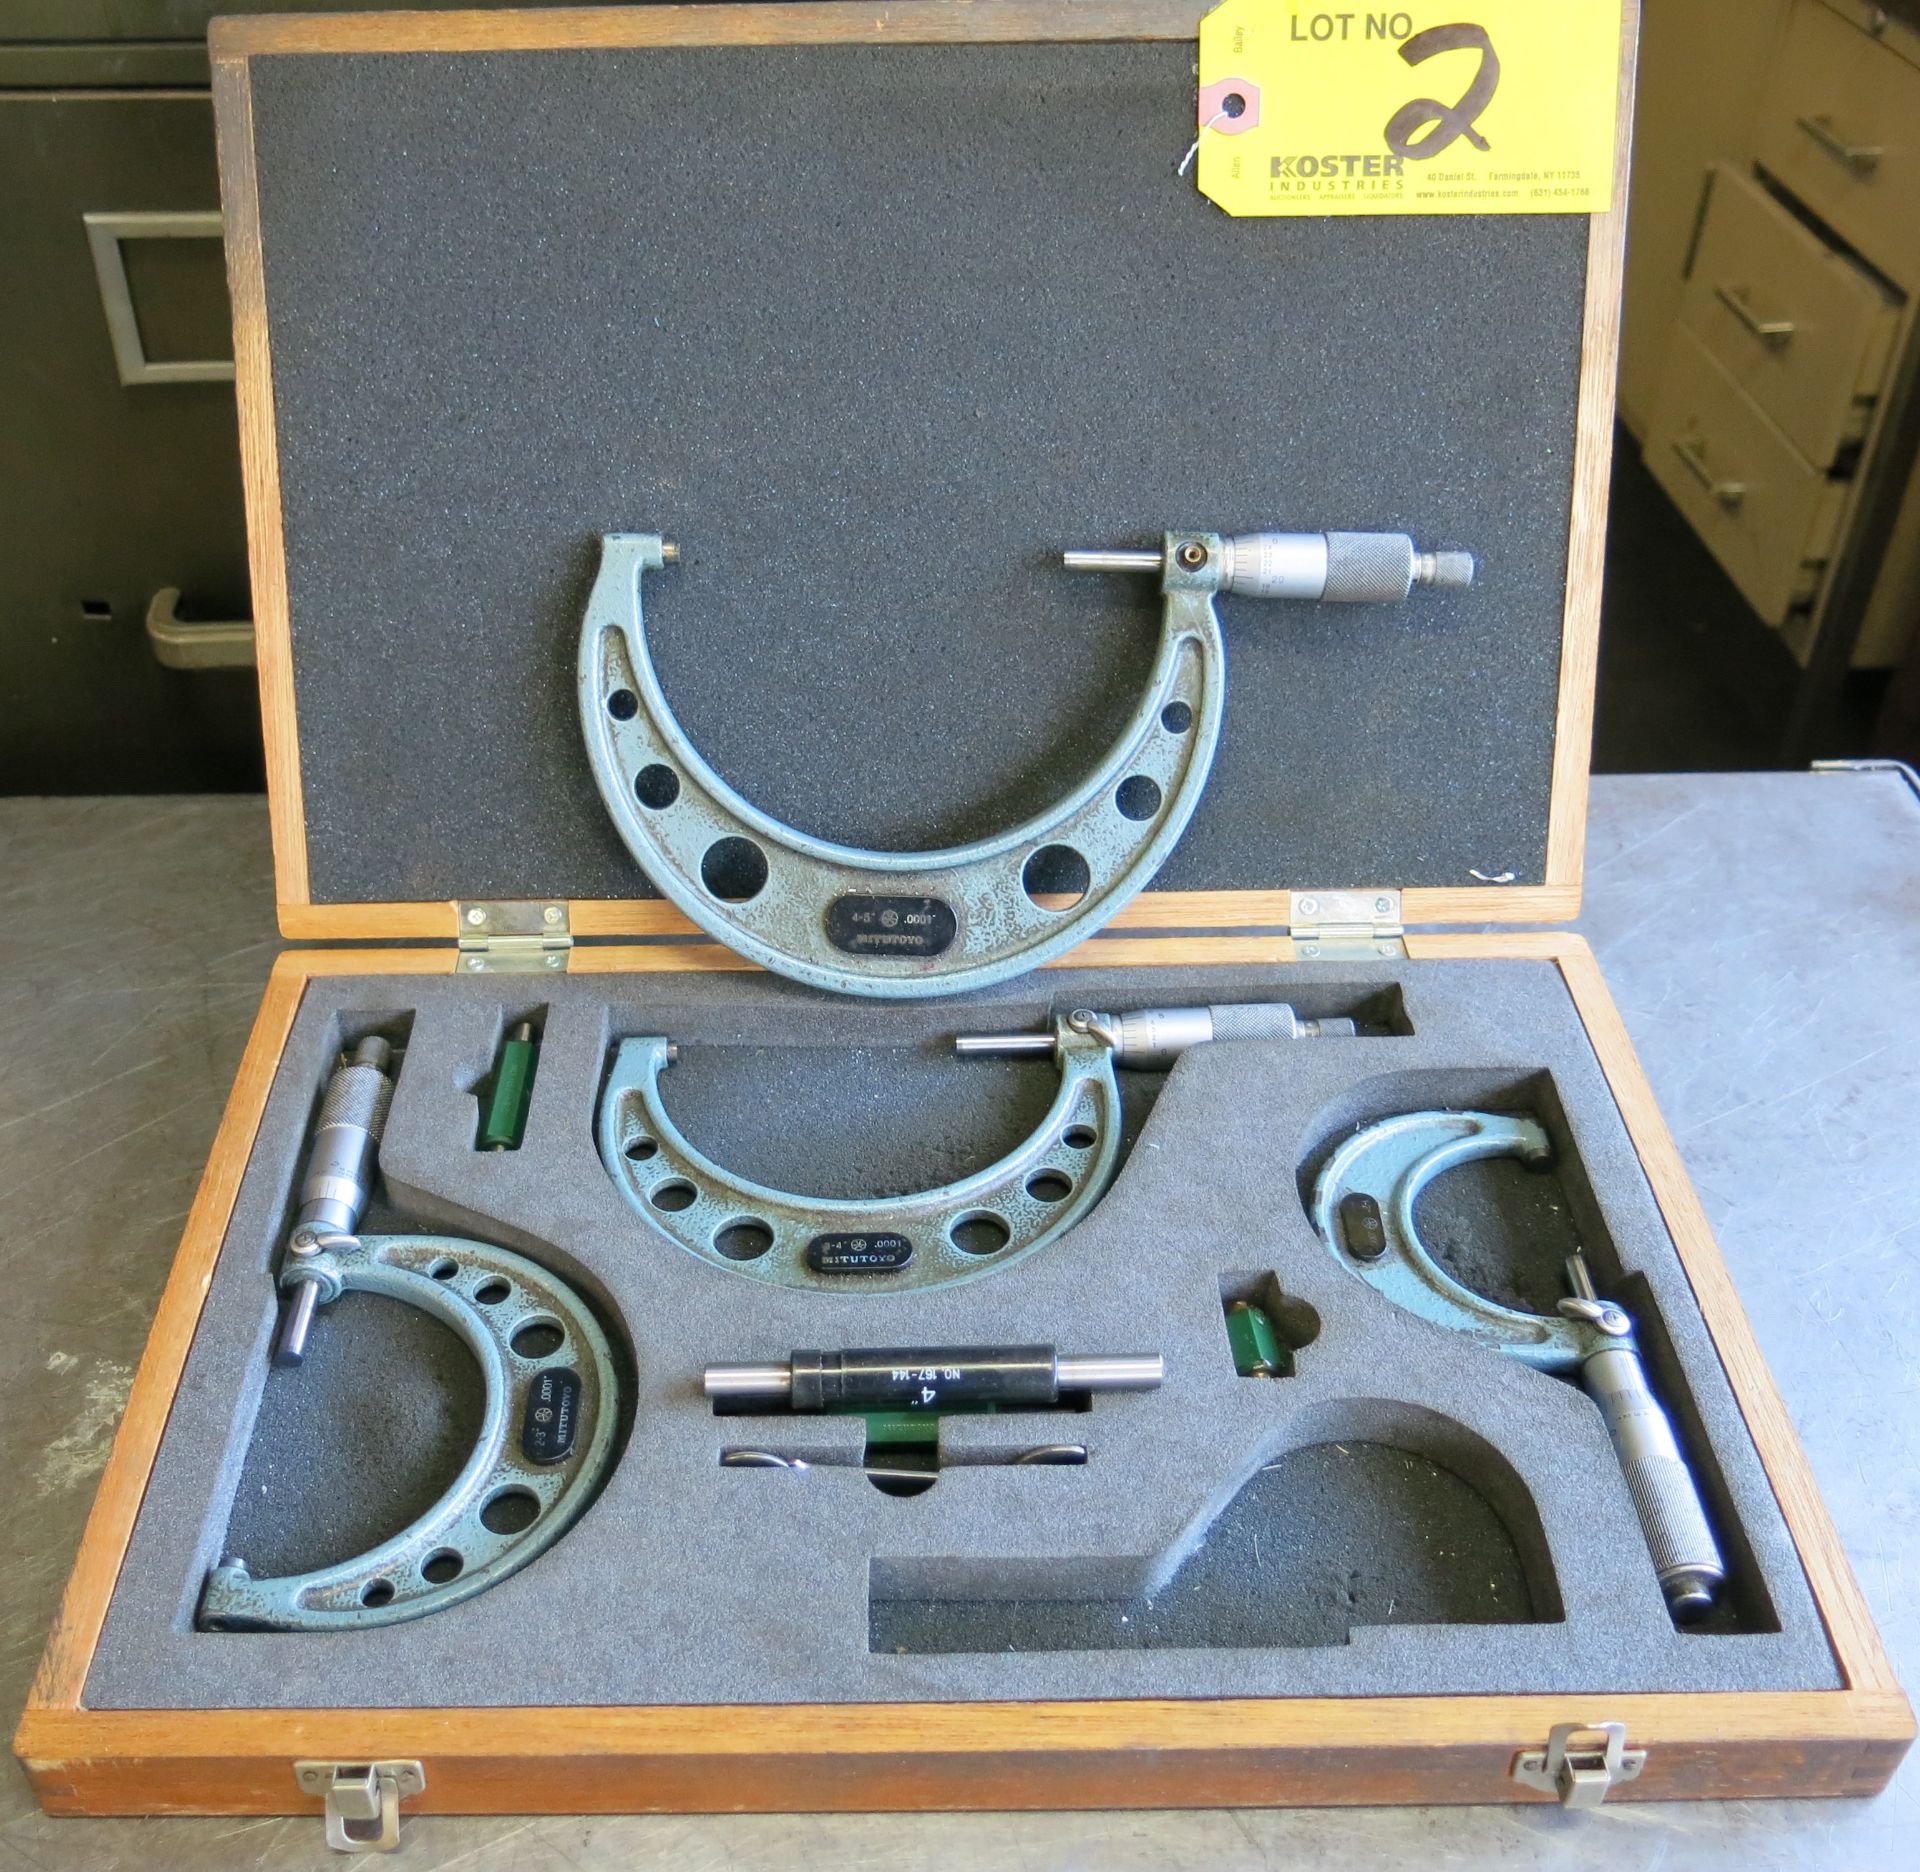 (1) MITUTOYO (4) PIECE MICROMETER SET WITH 4 - 5", 3 - 4", 2 - 3", AND 1 - 2" MITUTOYO MICROMETERS